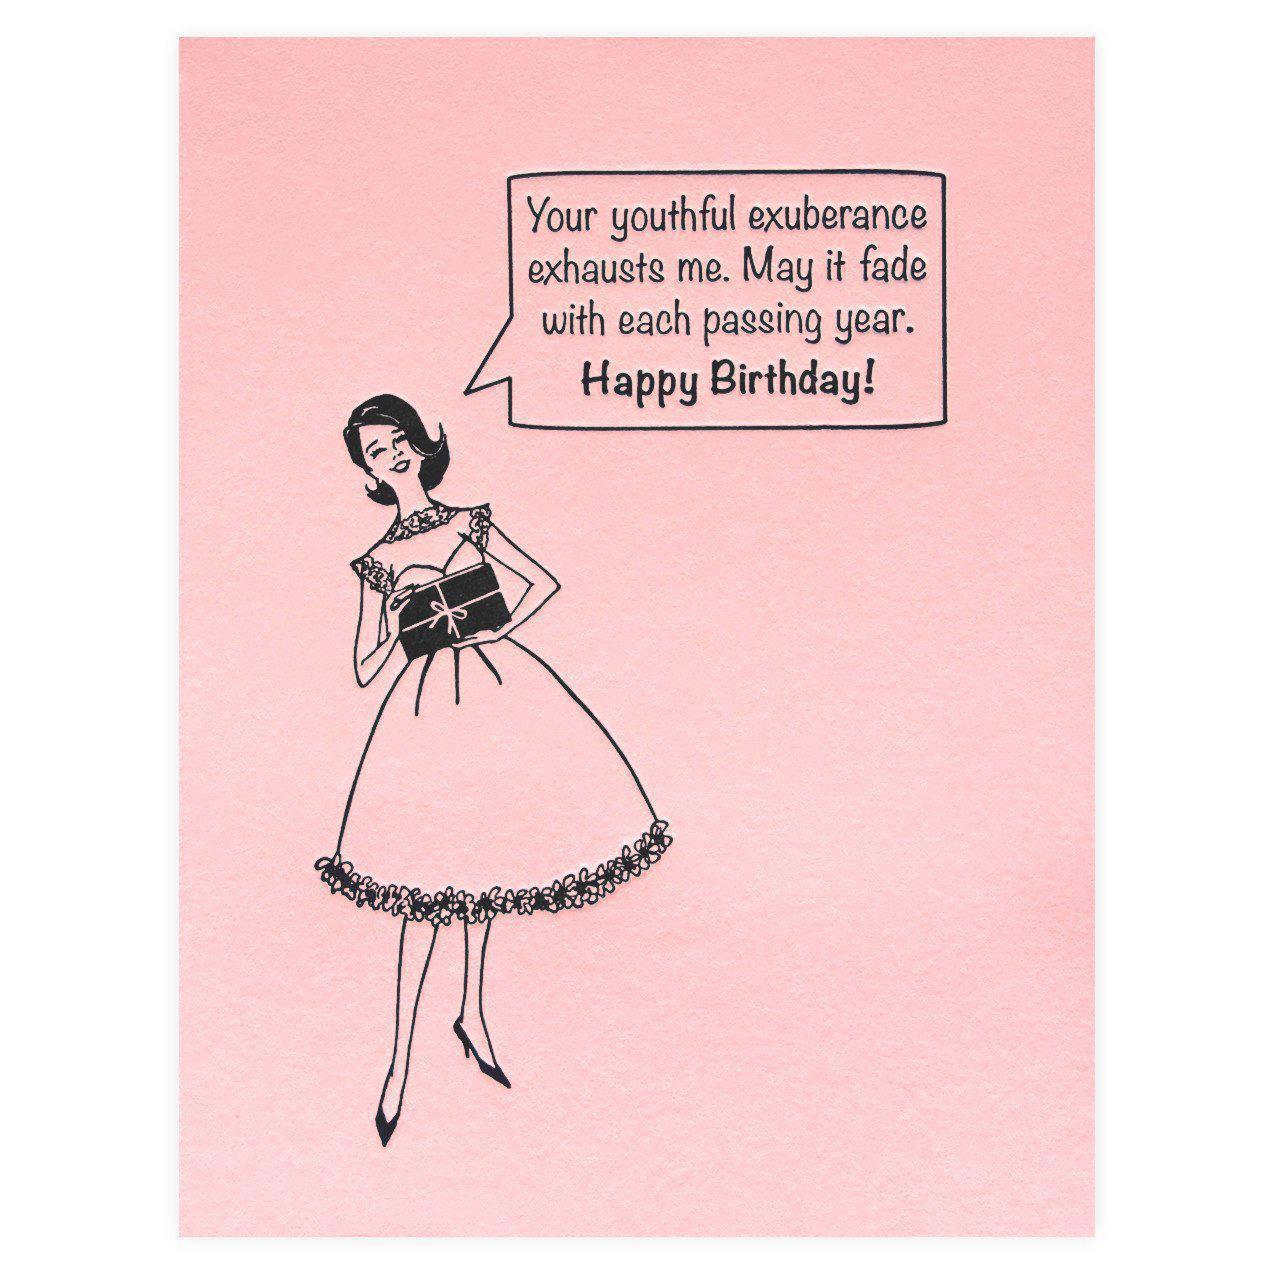 Guttersnipe Press Your Youthful Exuberance Exhausts Me Birthday Card 